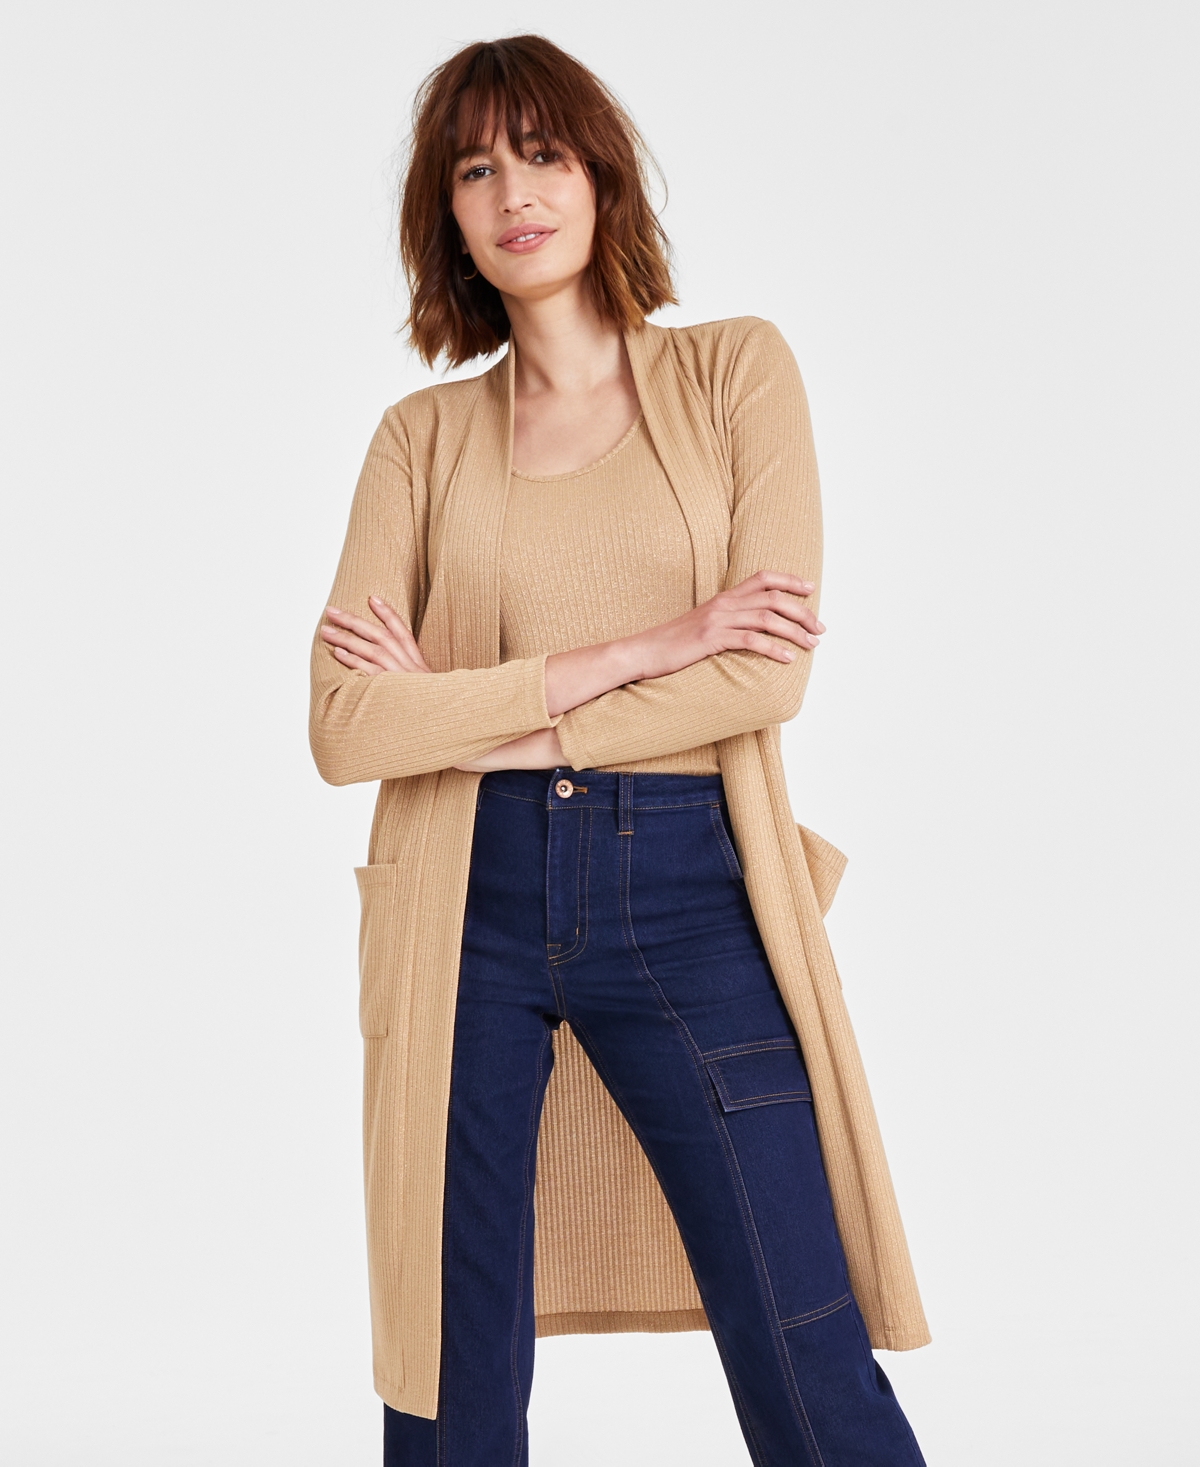 Women's Open-Front Rib-Knit Duster Cardigan - Light Vicuna